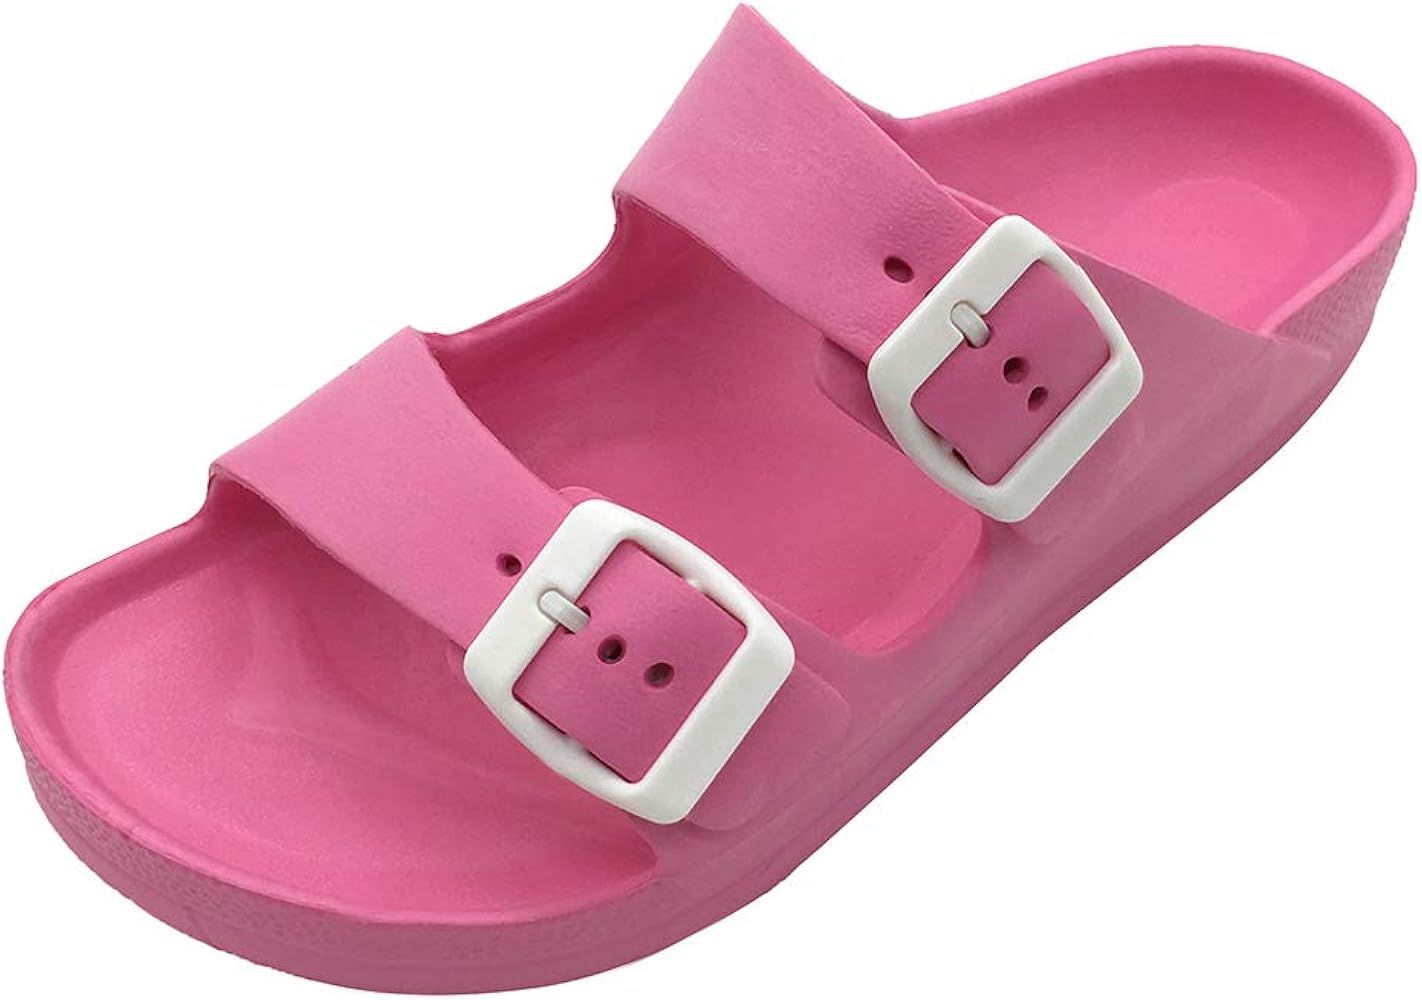 LUFFYMOMO Adjustable Slip on Eva Double Buckle Slides Comfort Footbed Thong Sandals for Womens | Amazon (US)